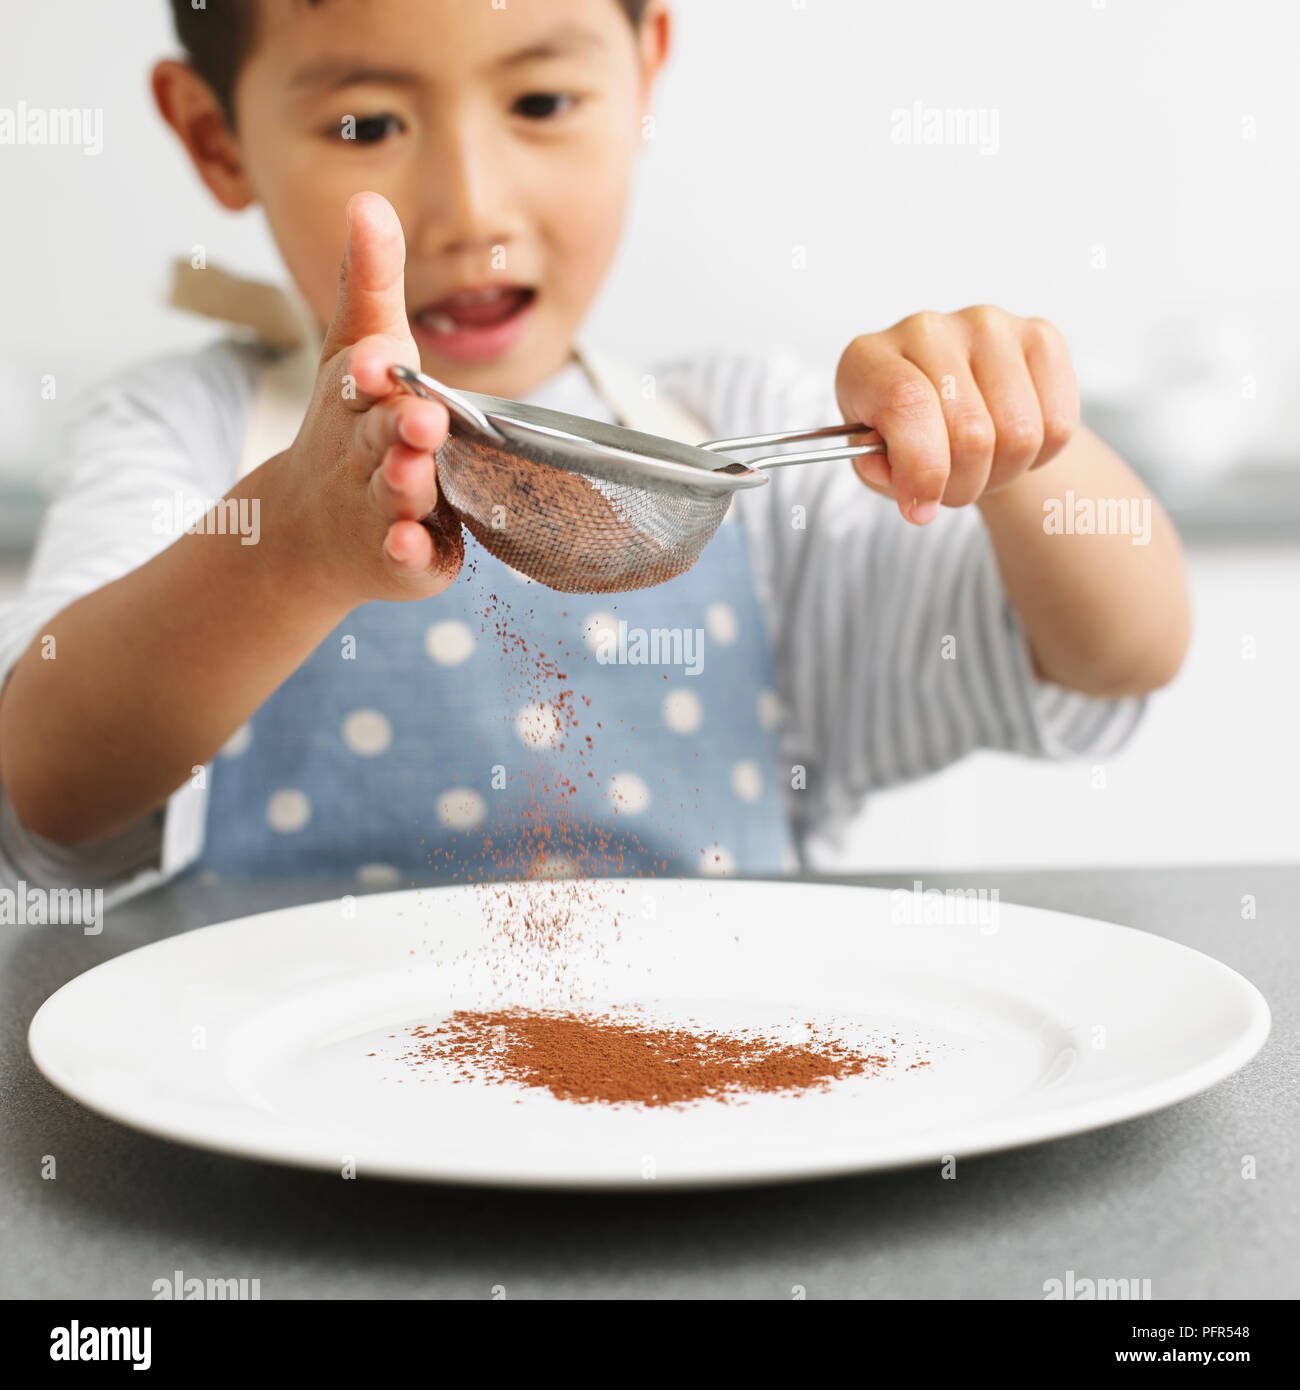 Boy sifting chocolate powder onto a plate, 4 years Stock Photo